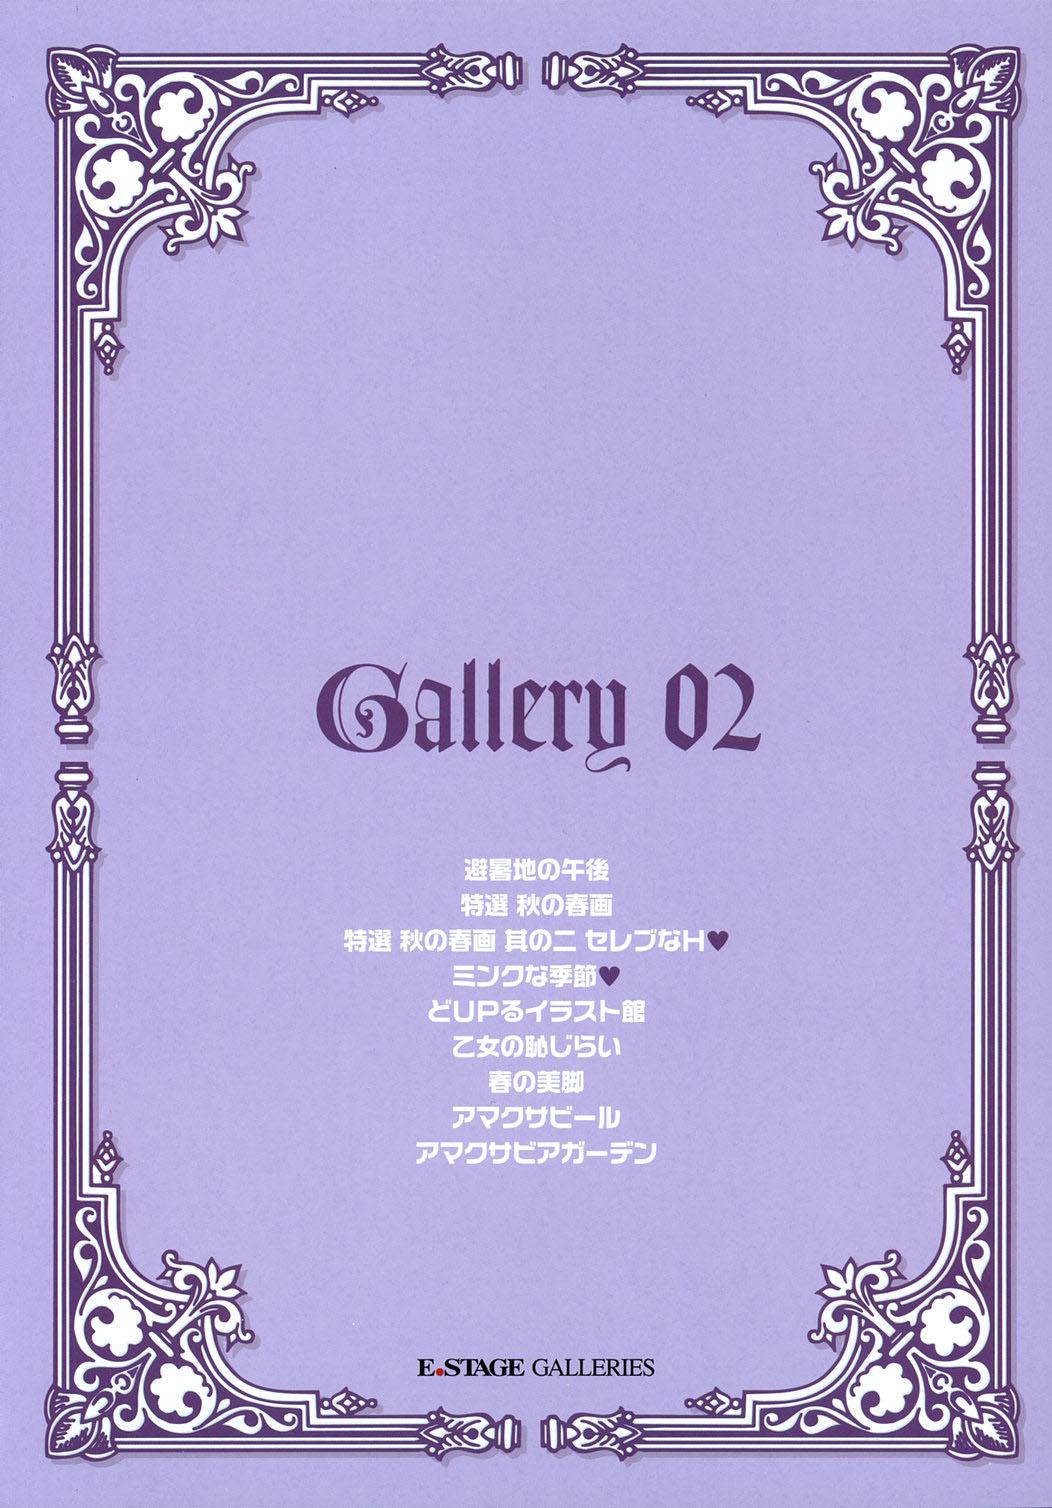 E.STAGE GALLERIES 37